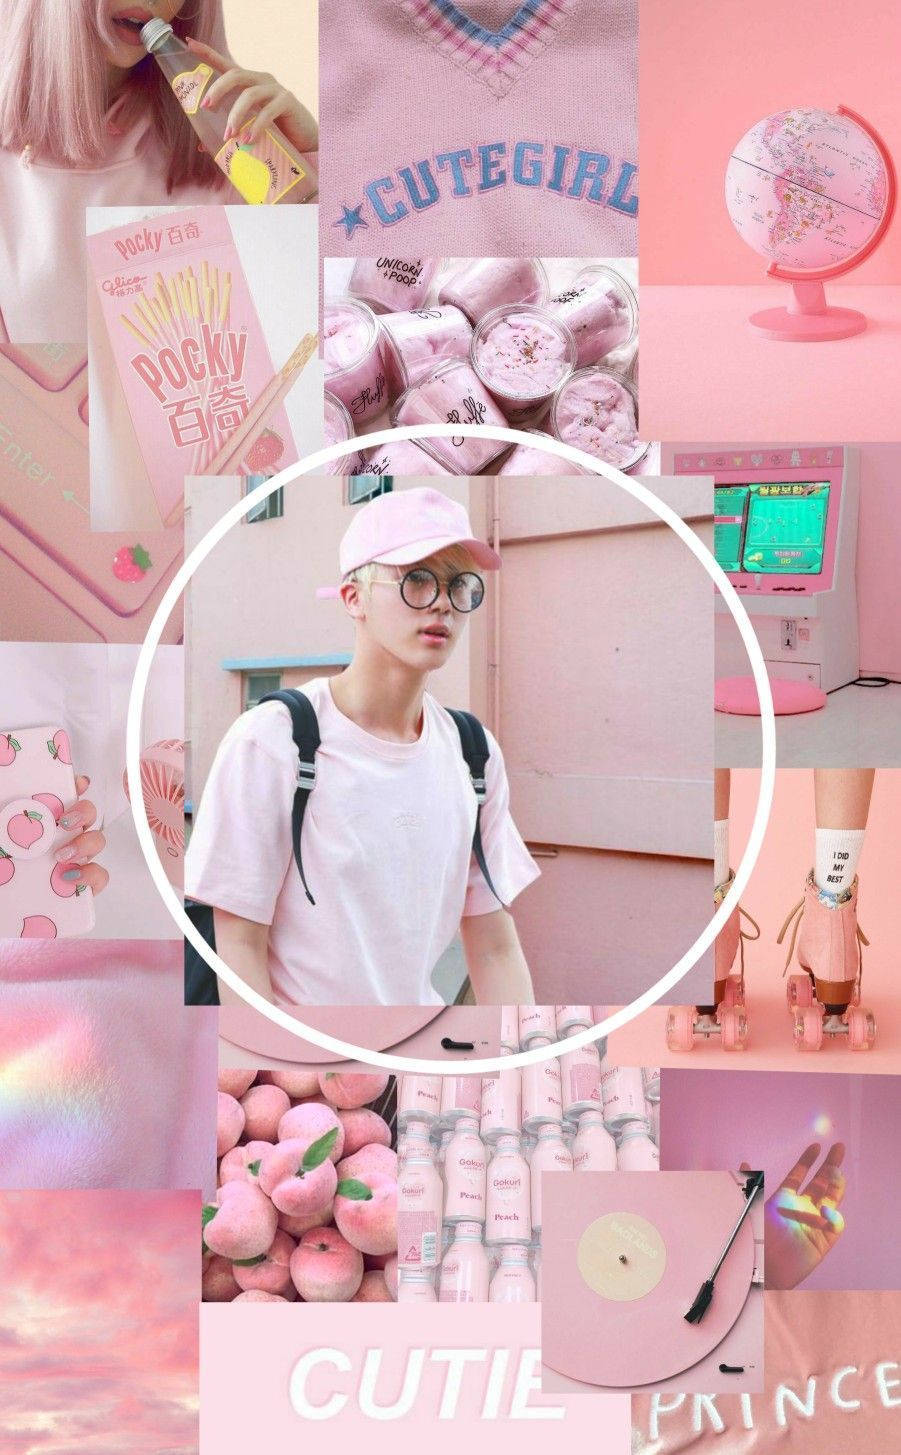 Download White And Pink BTS Jin Aesthetic Wallpaper